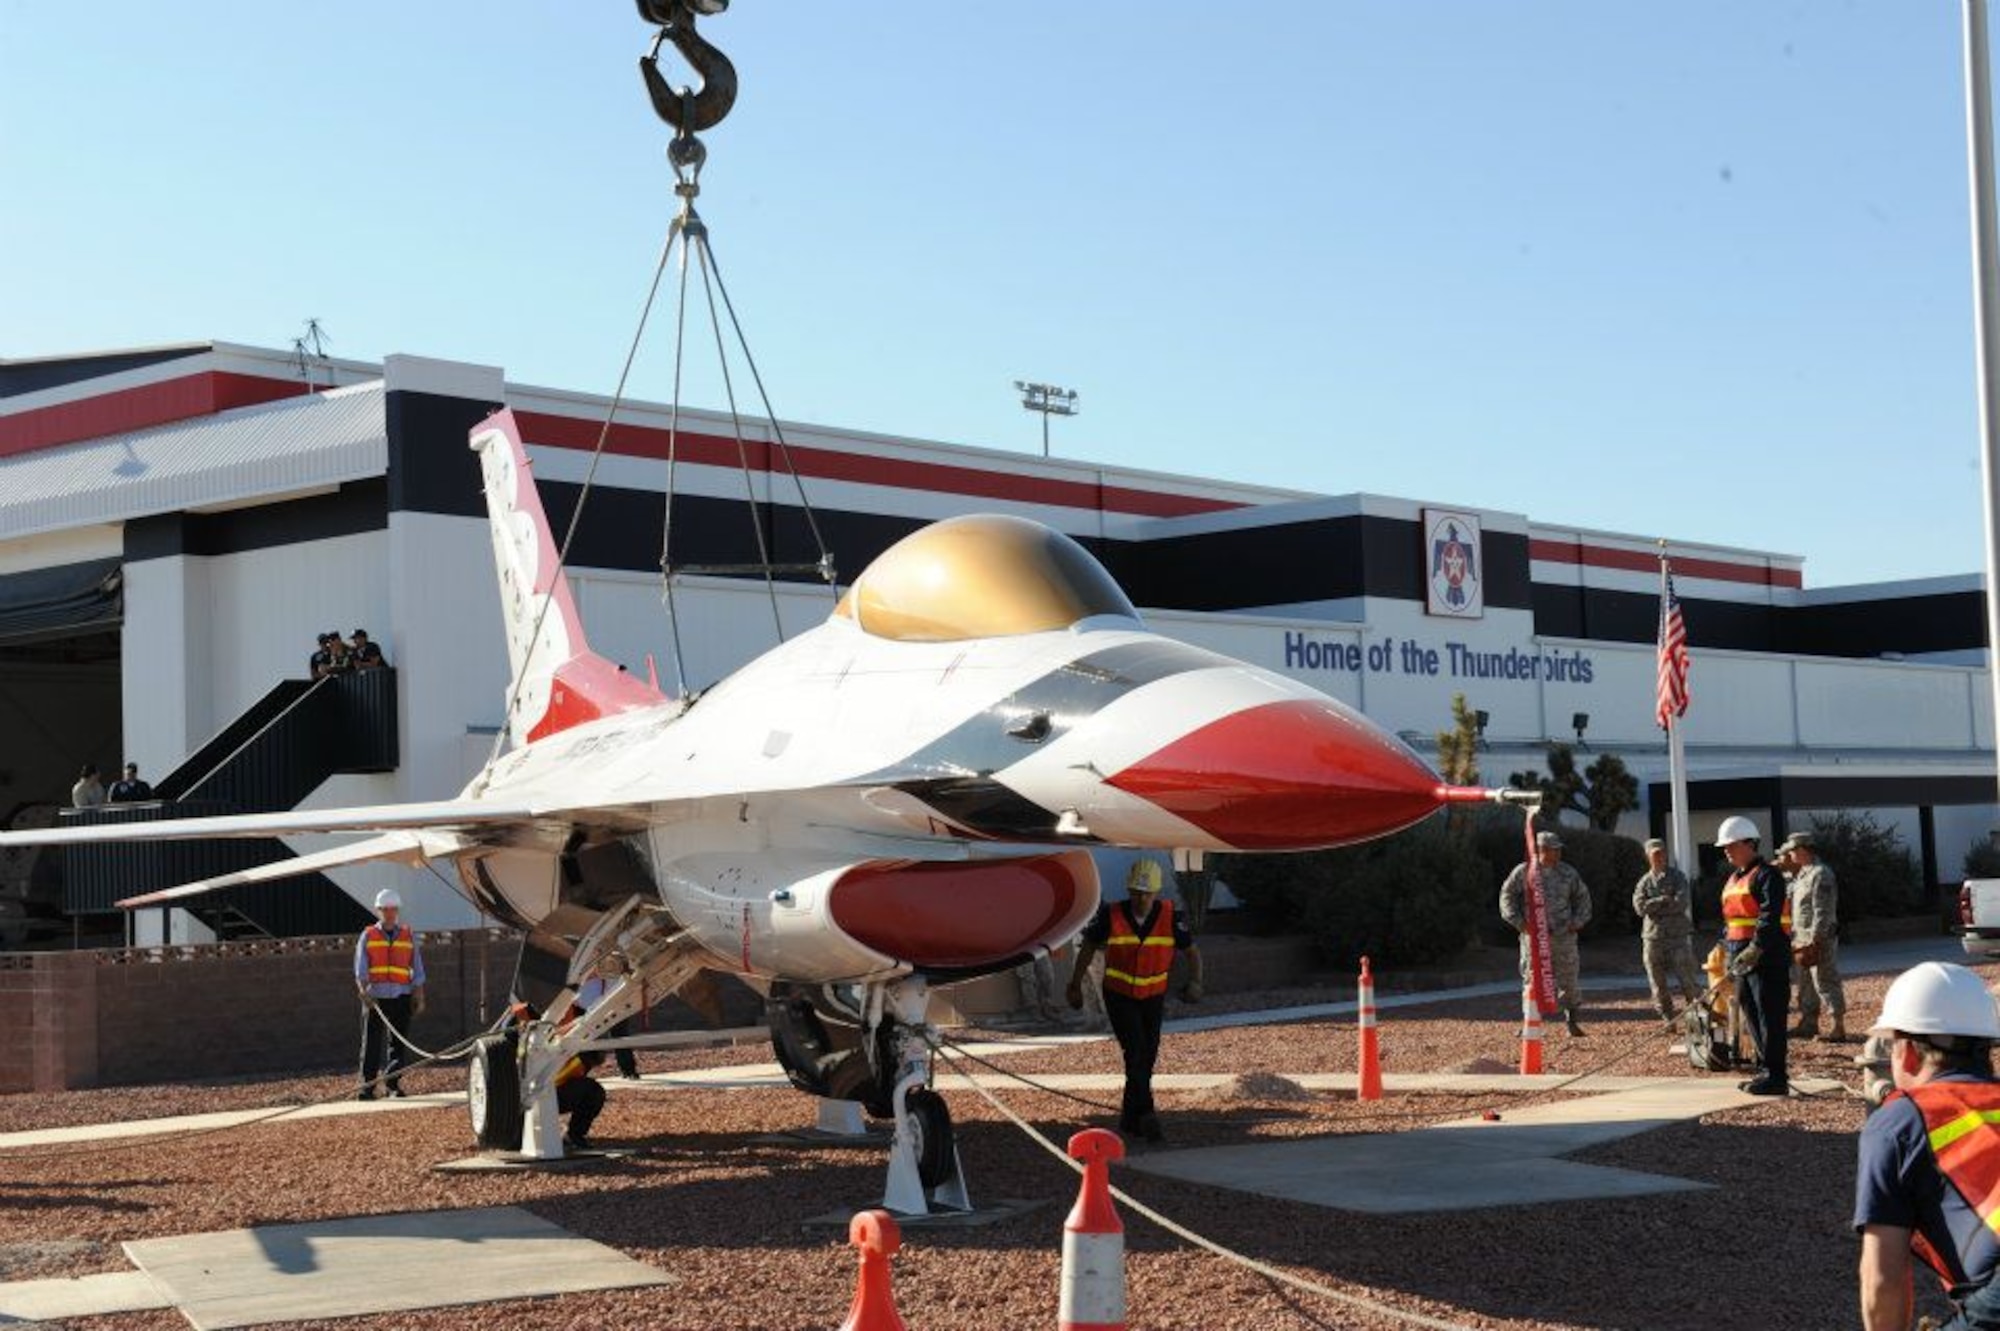 The Thunderbirds F-16C static display, tail number 87-0323, is placed on display outside the Thunderbird hangar on Oct. 31, 2011 at Nellis Air Force Base, Nev. The Thunderbirds transitioned from the F-16A/B in 1991 to the F-16C/D for the 1992 show season. (U.S. Air Force photo/Staff Sgt Richard W. Rose Jr.)